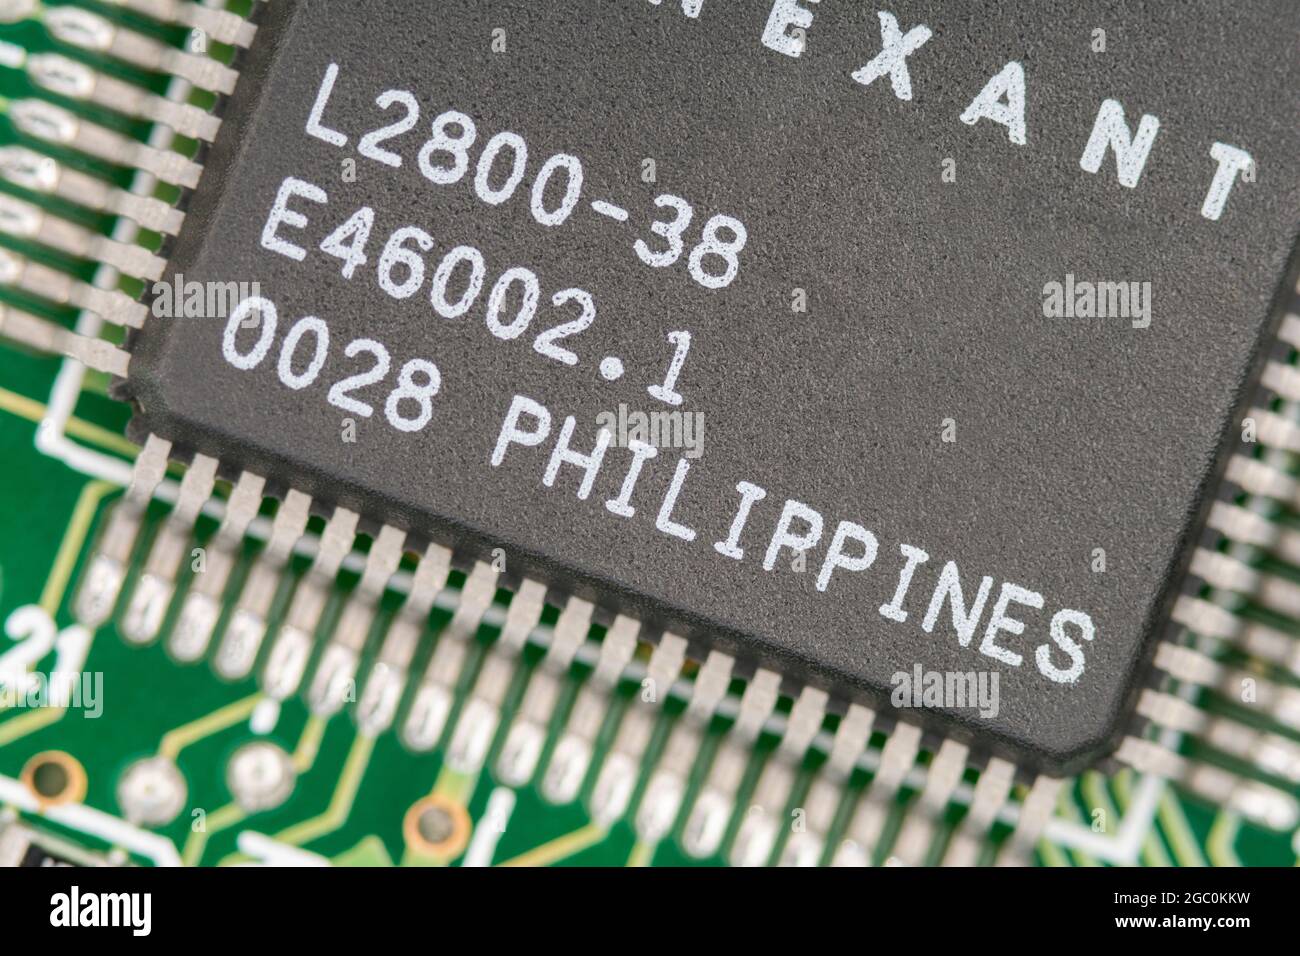 Macro close up shot of a microchip made in Philippines on a legacy modem card pcb with rows of pinouts visible. Chip made by Conexant. Stock Photo